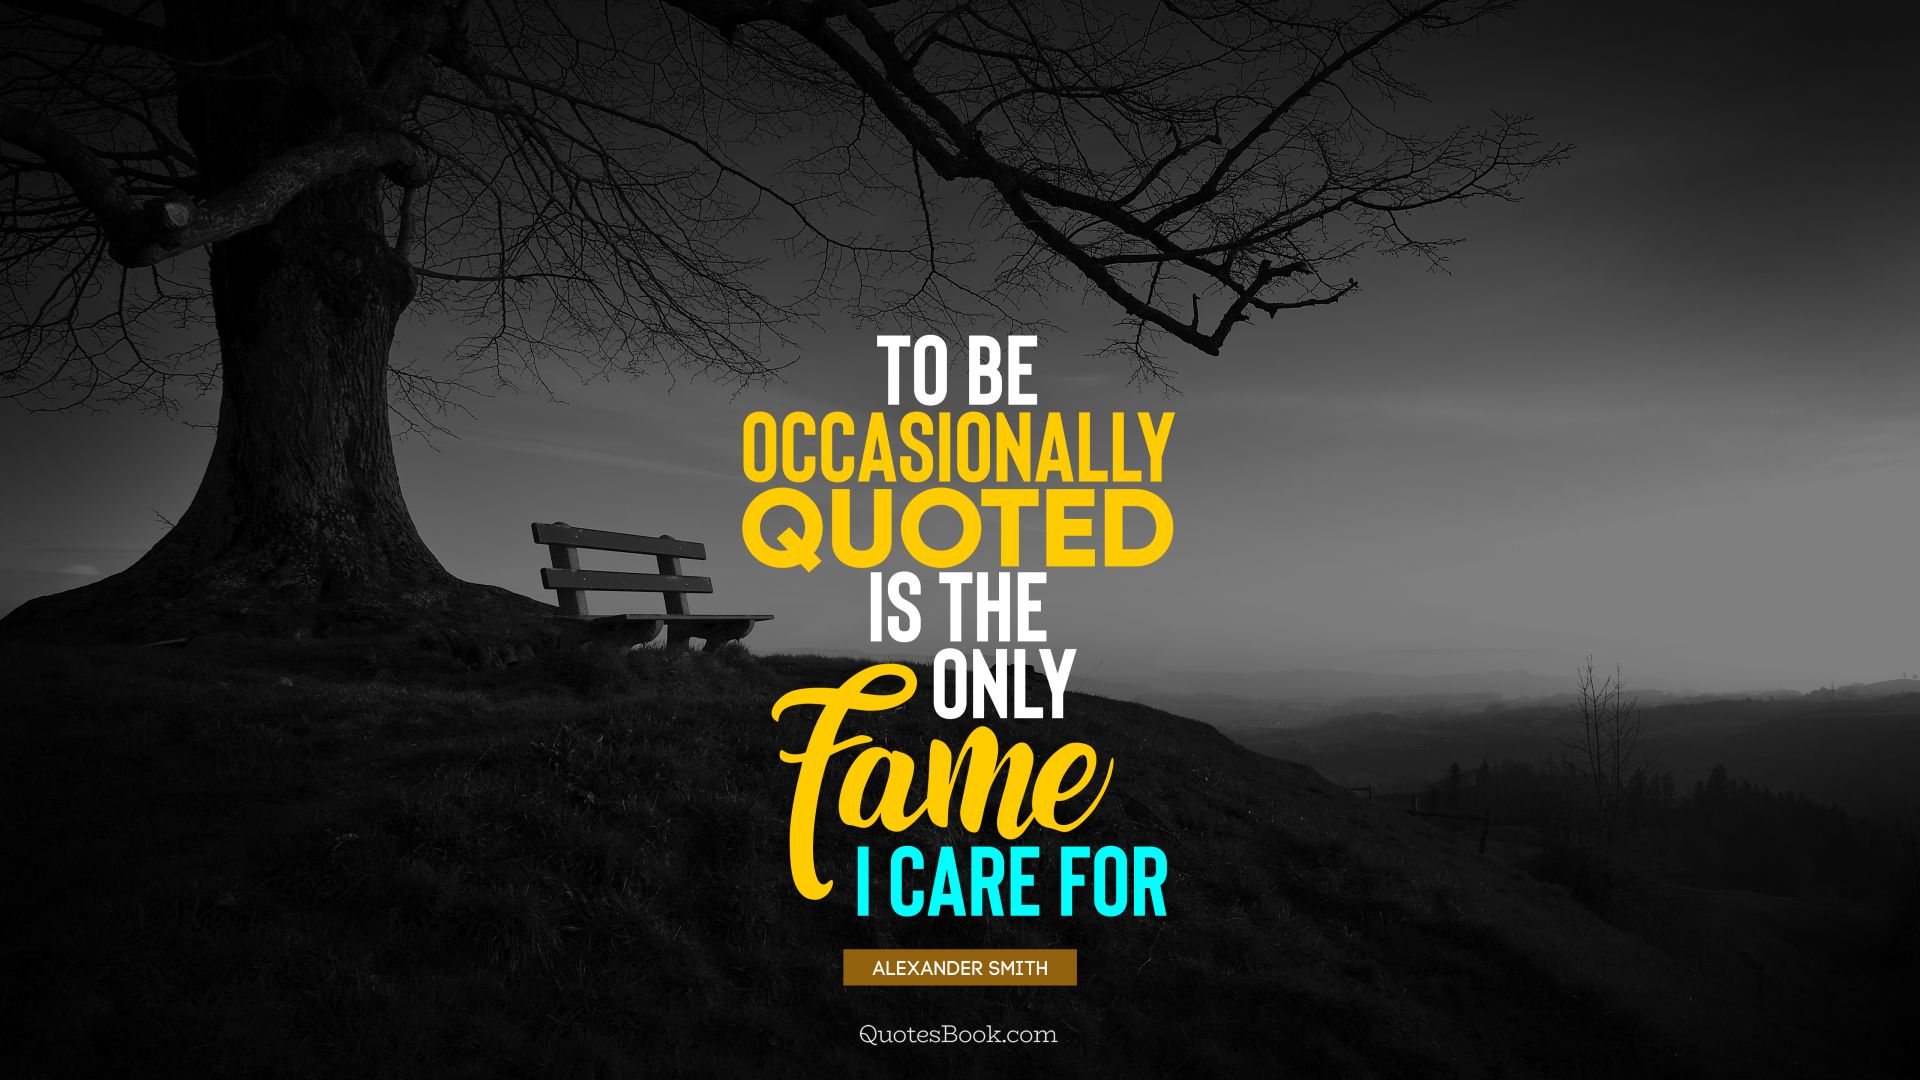 To be occasionally quoted is the only fame I care for. - Quote by Alexander Smith